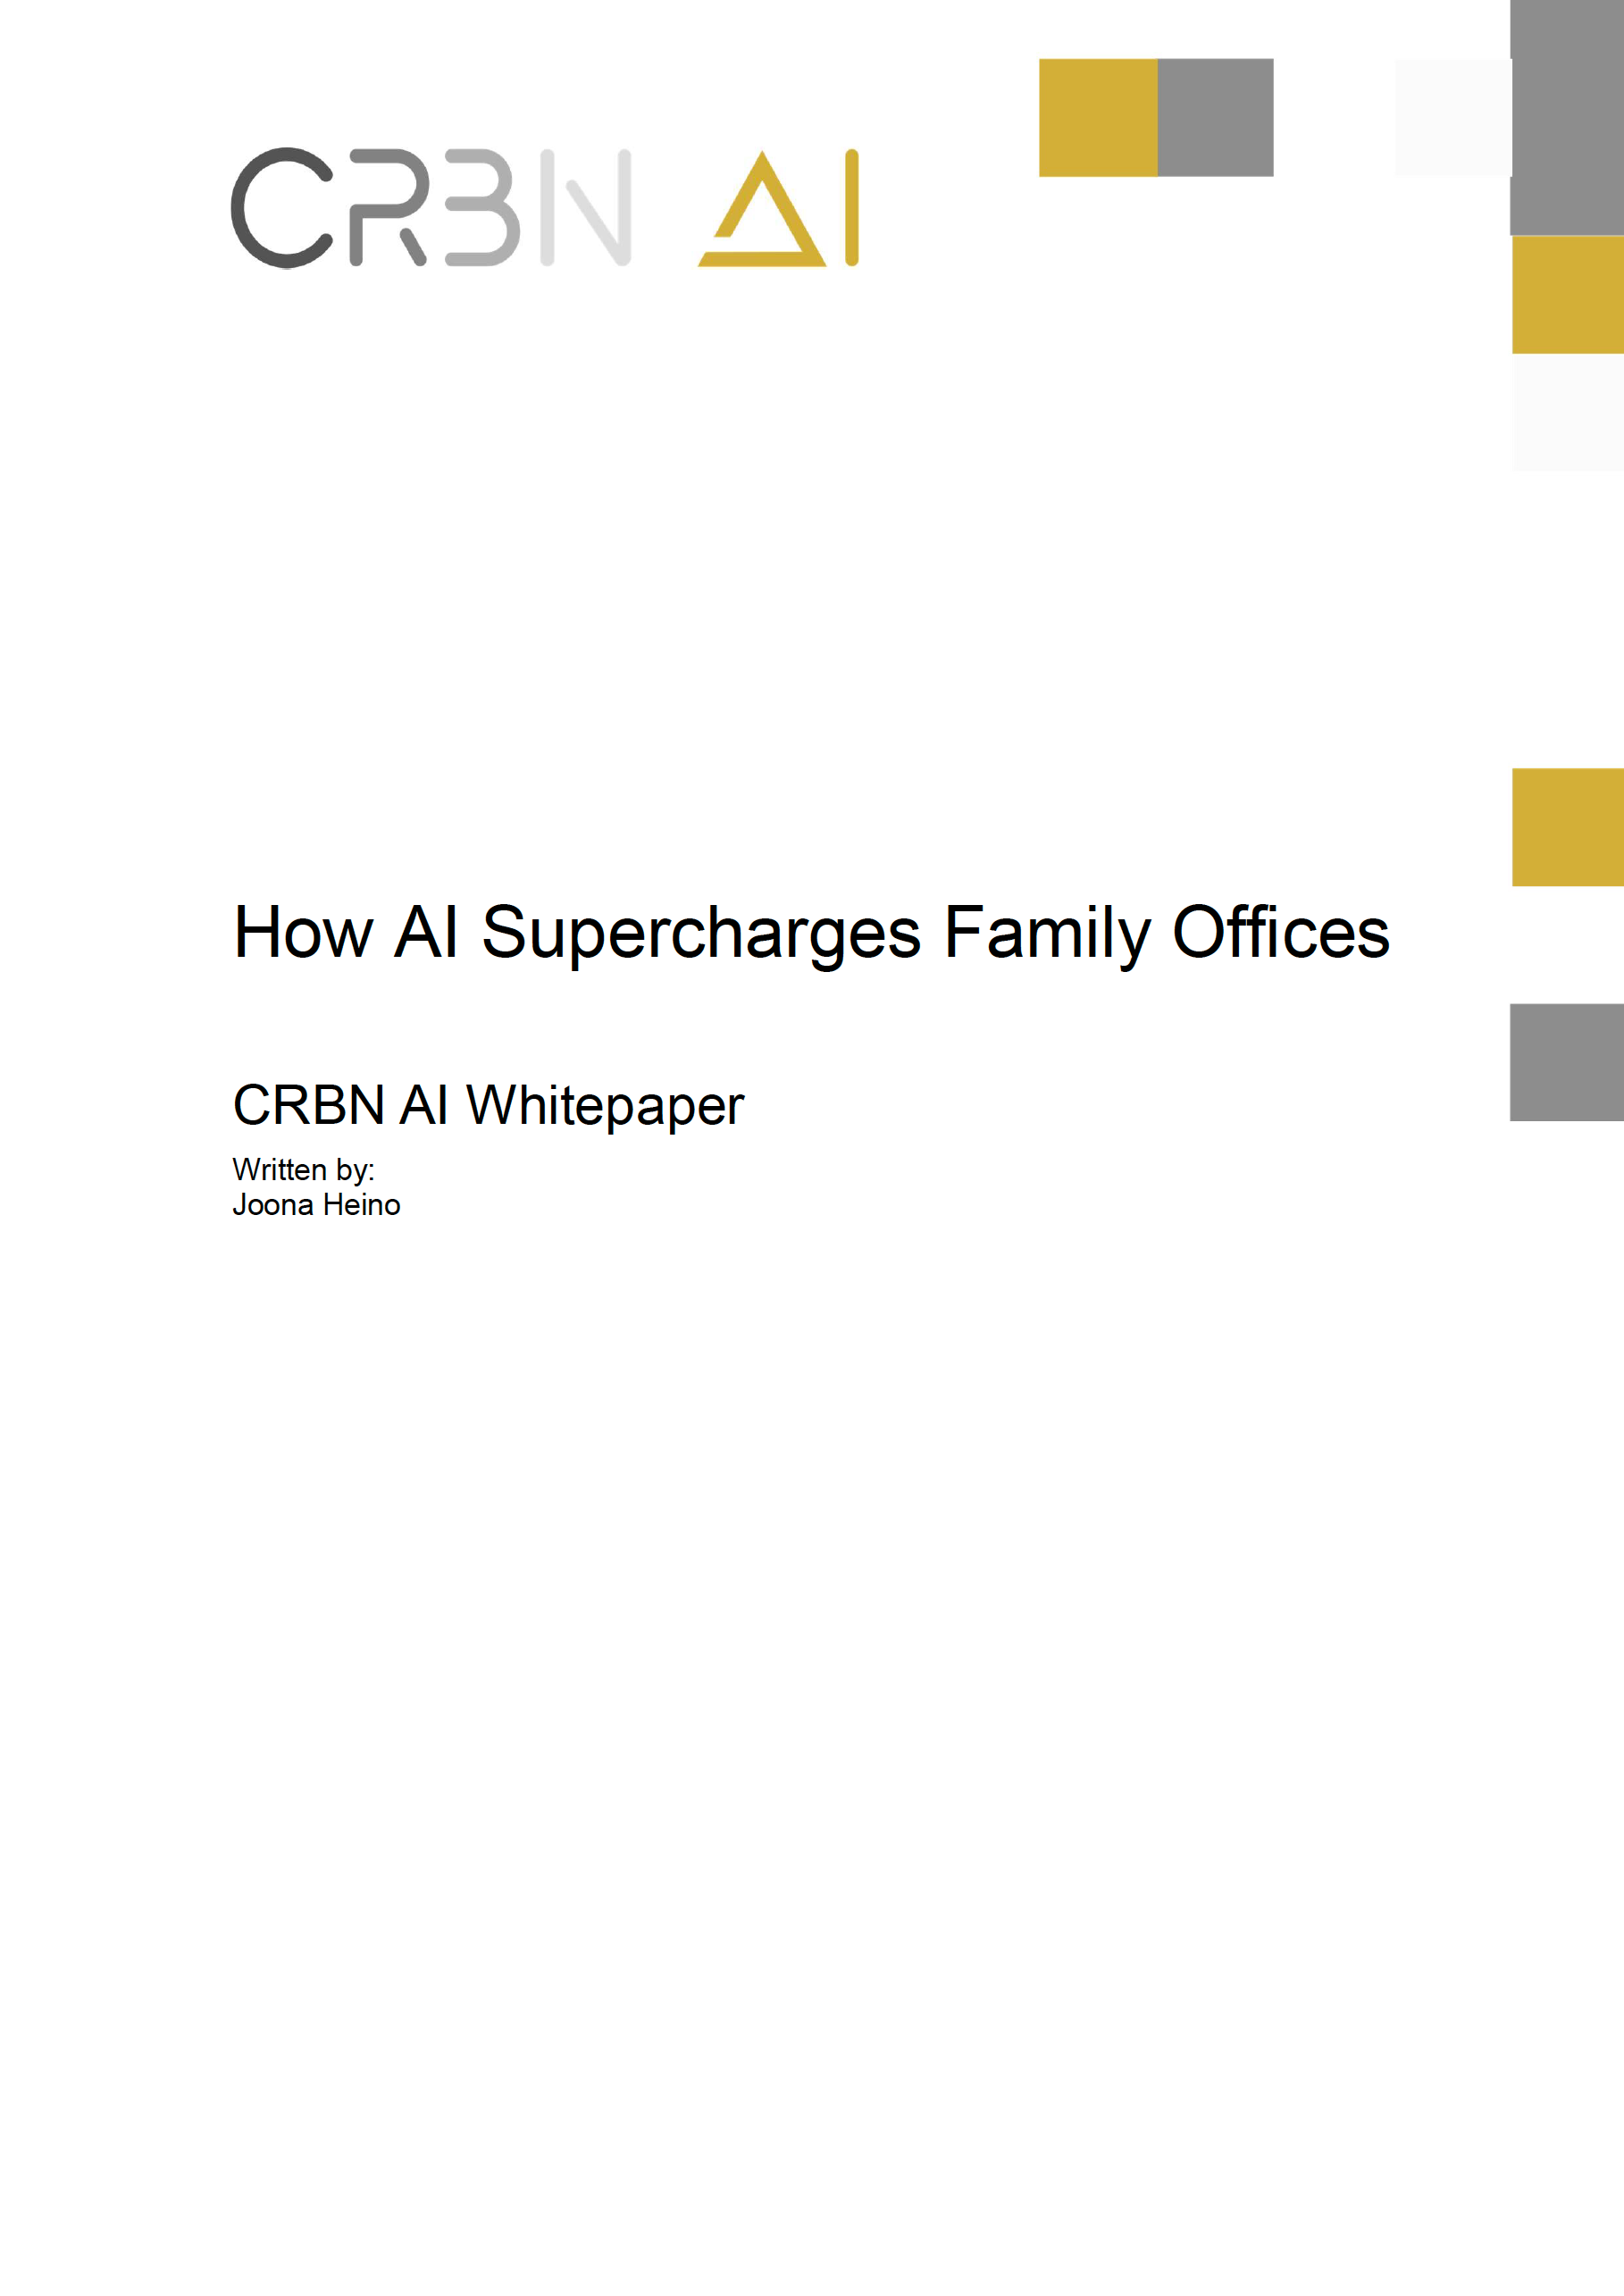 How AI Supercharges Family Offices